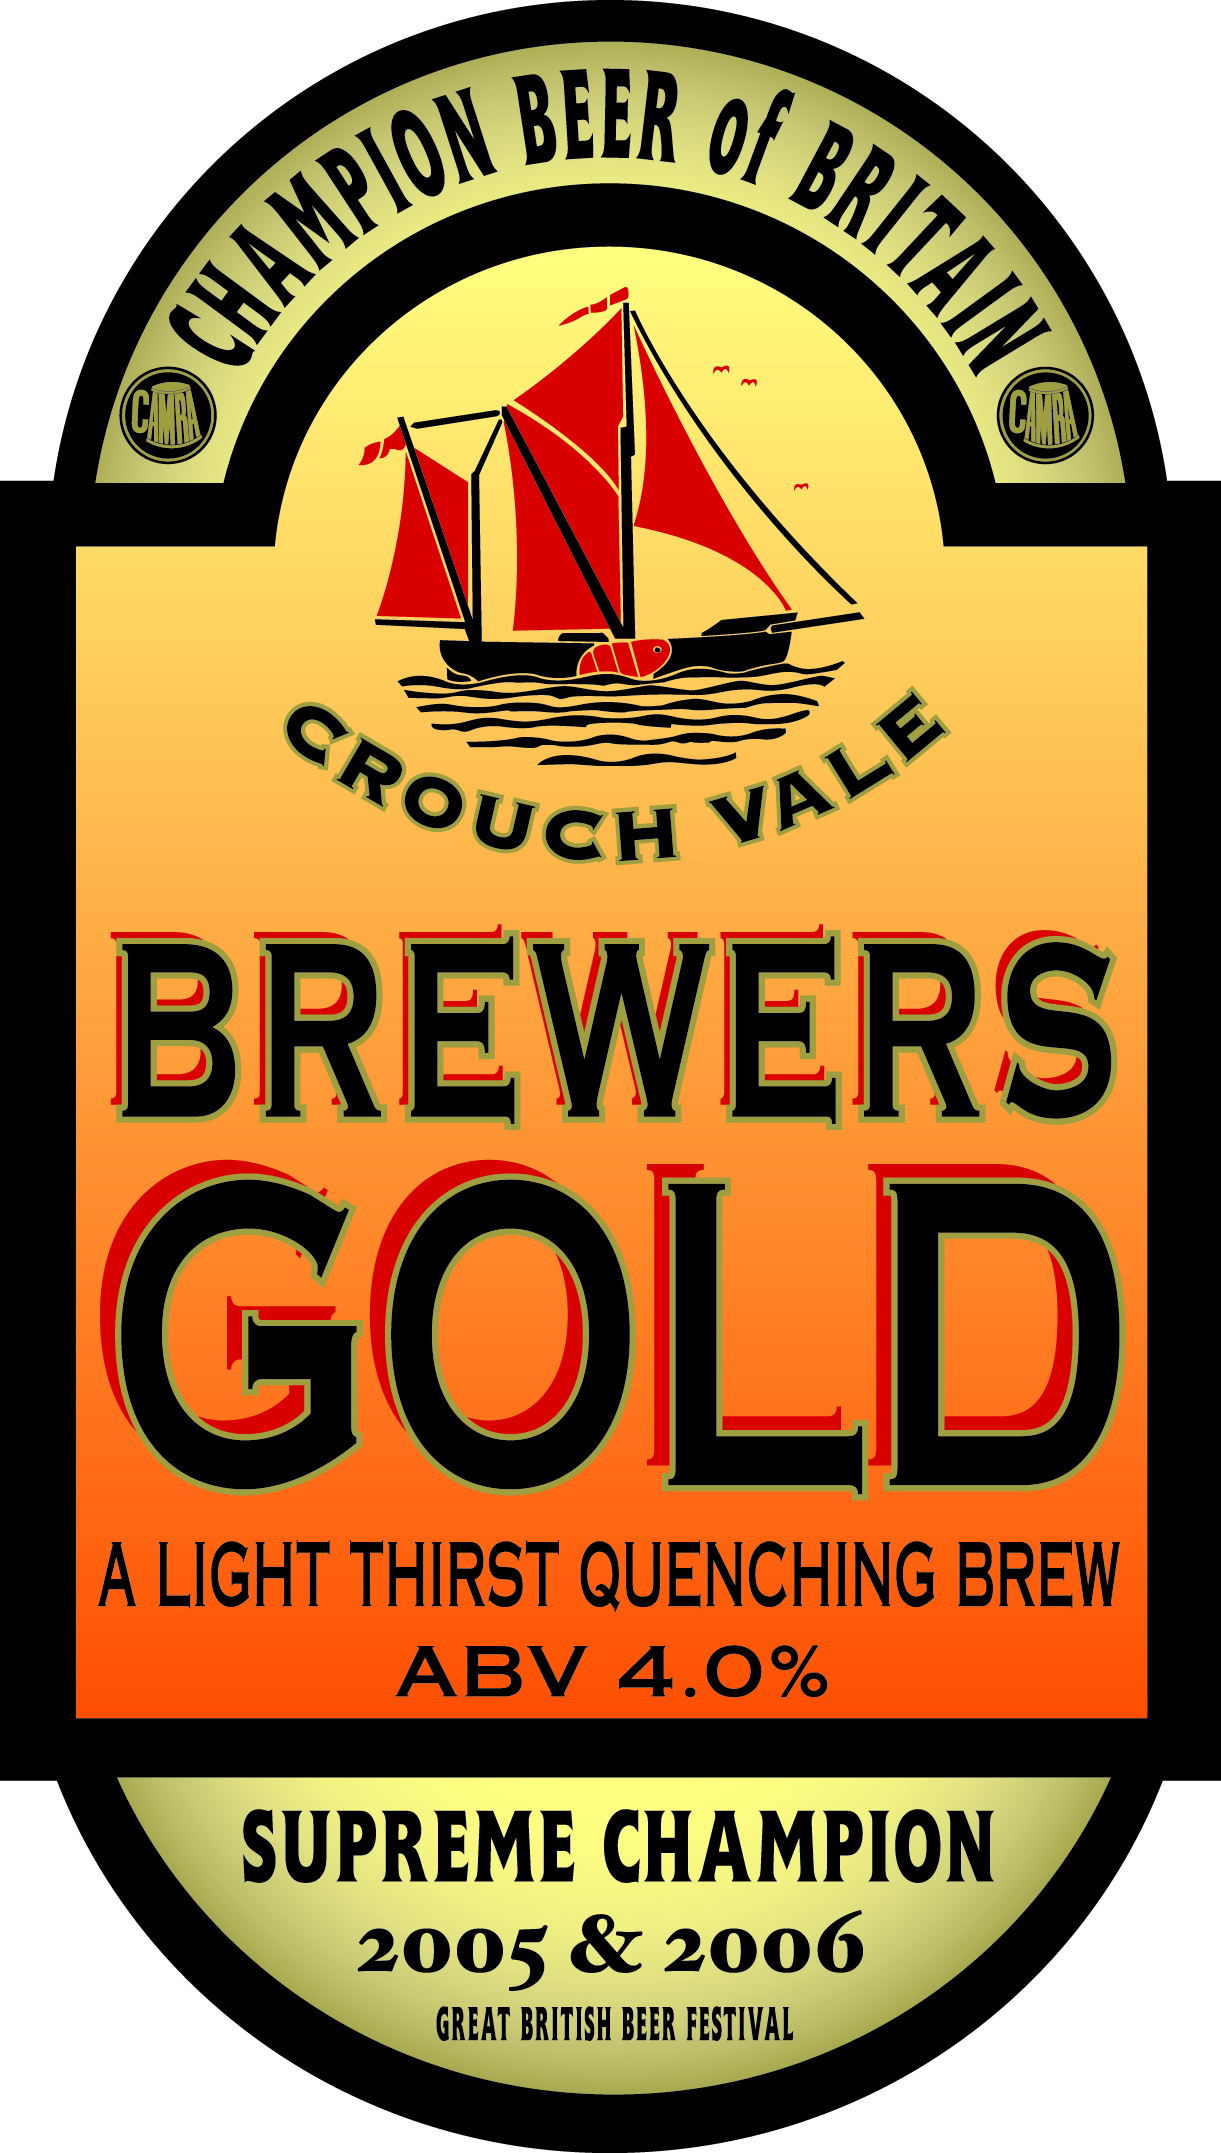 Brewers Gold X Ml Bottles Alc Vol Crouch Vale Brewery